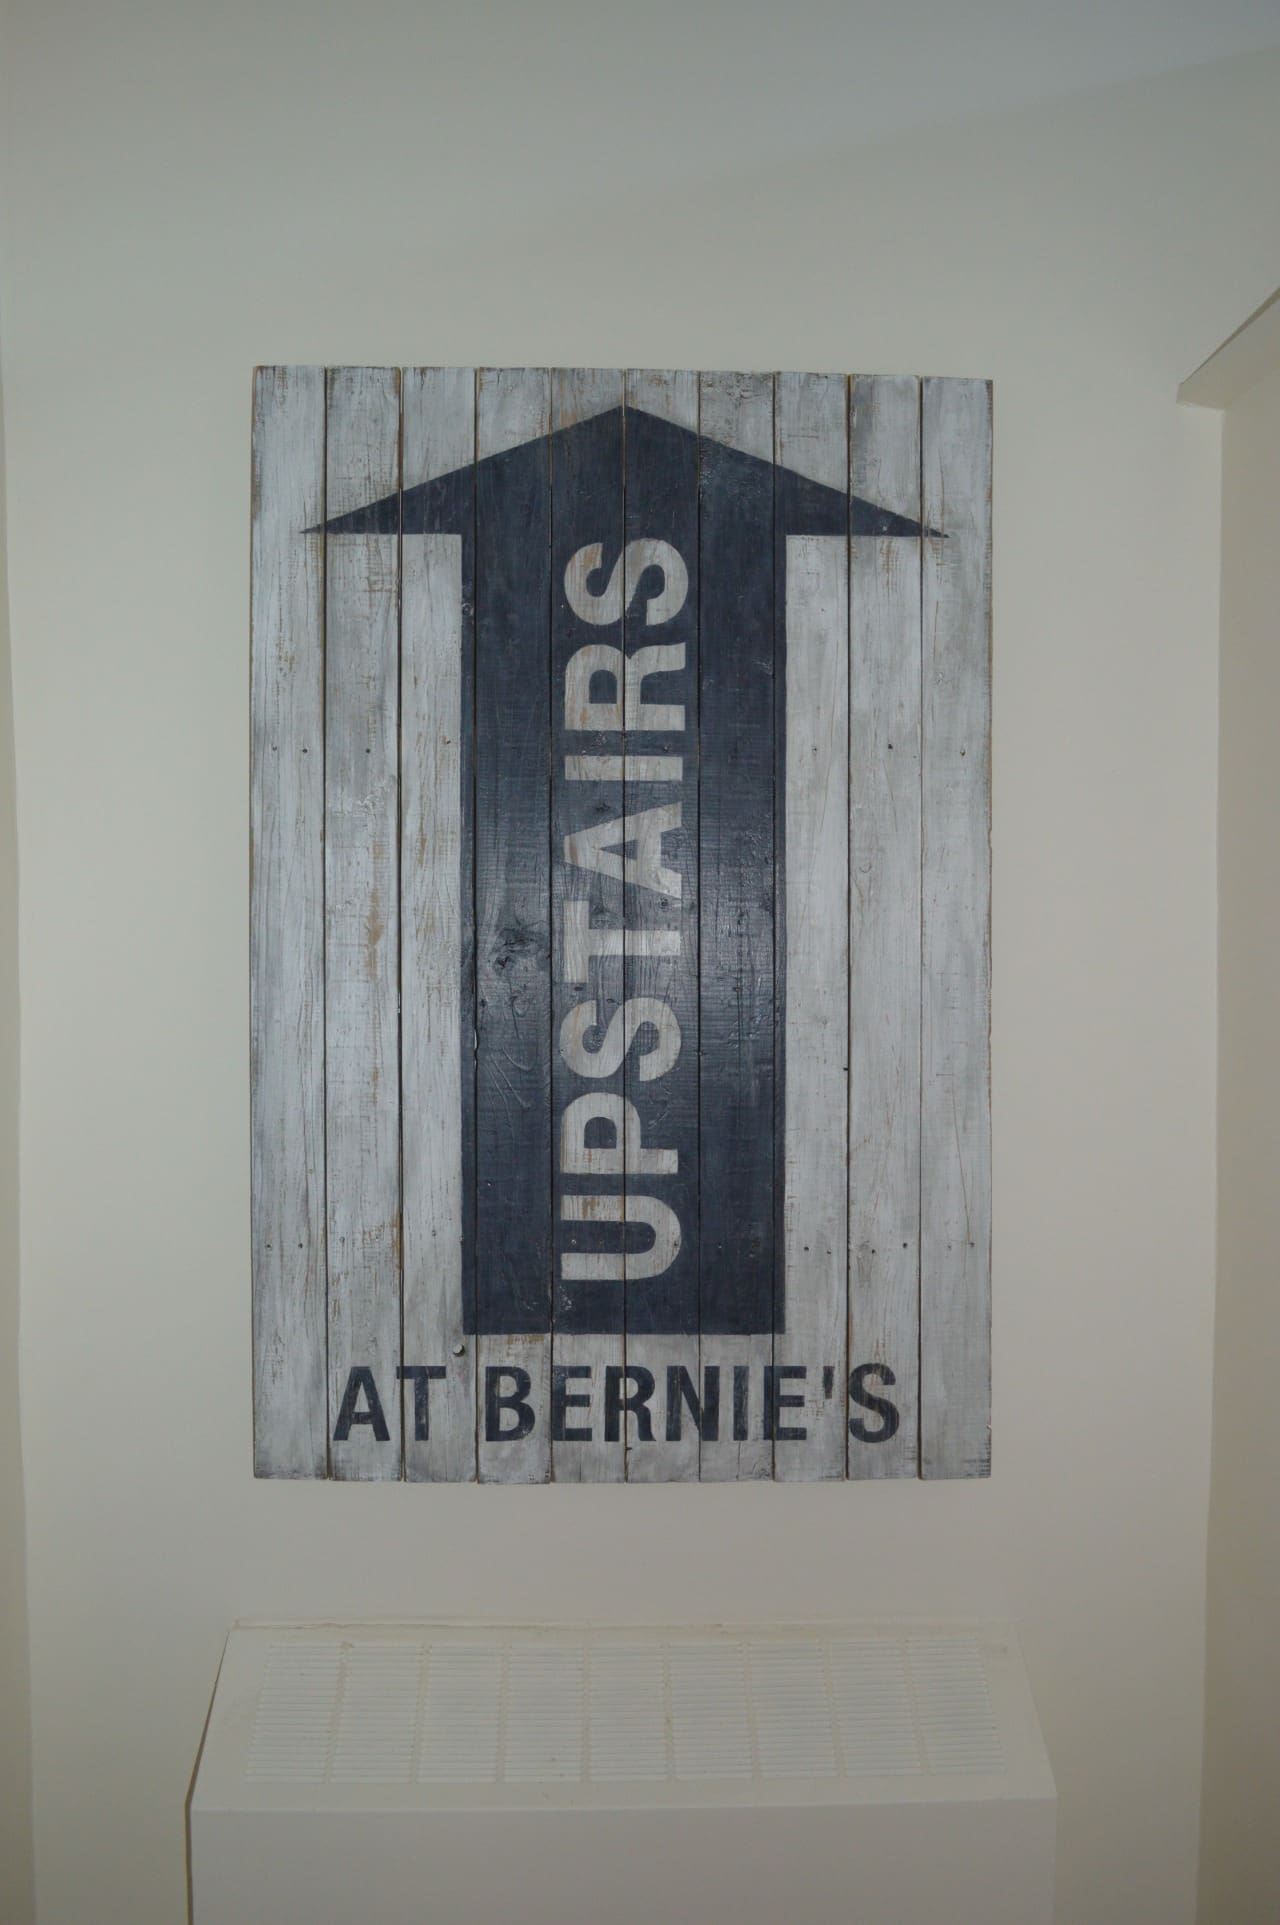 A picture of UPSTAIRS at Bernies painting on the wall